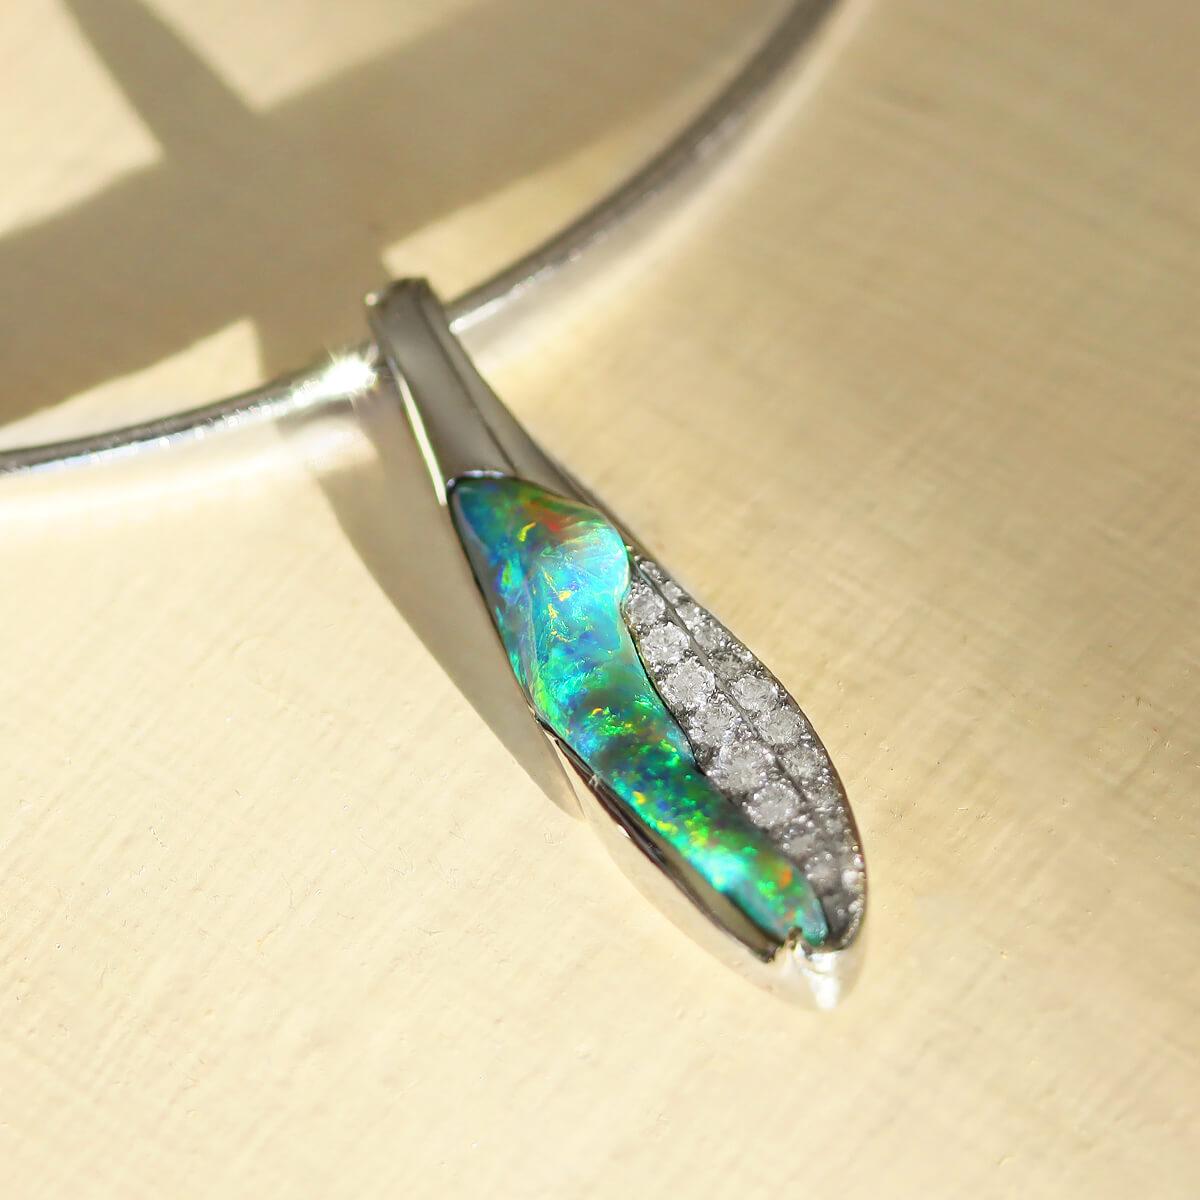 When you are looking for something completely unique as well as beautiful, look no further. With almost a carat of brilliant white diamonds and that gorgeous blue-green black opal, this pendant just takes your breath away. Imagine how this elegant